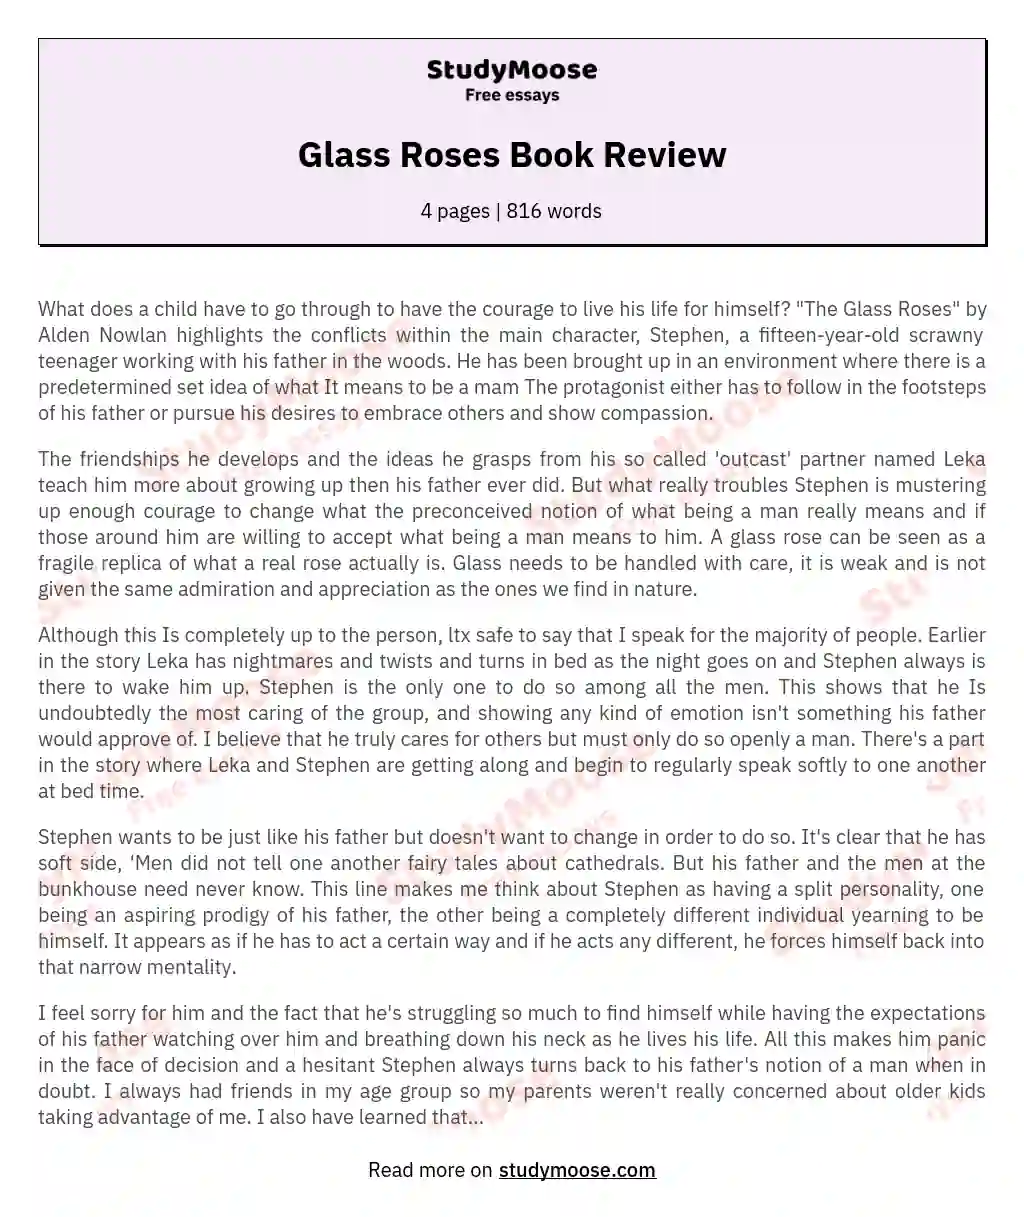 Glass Roses Book Review essay